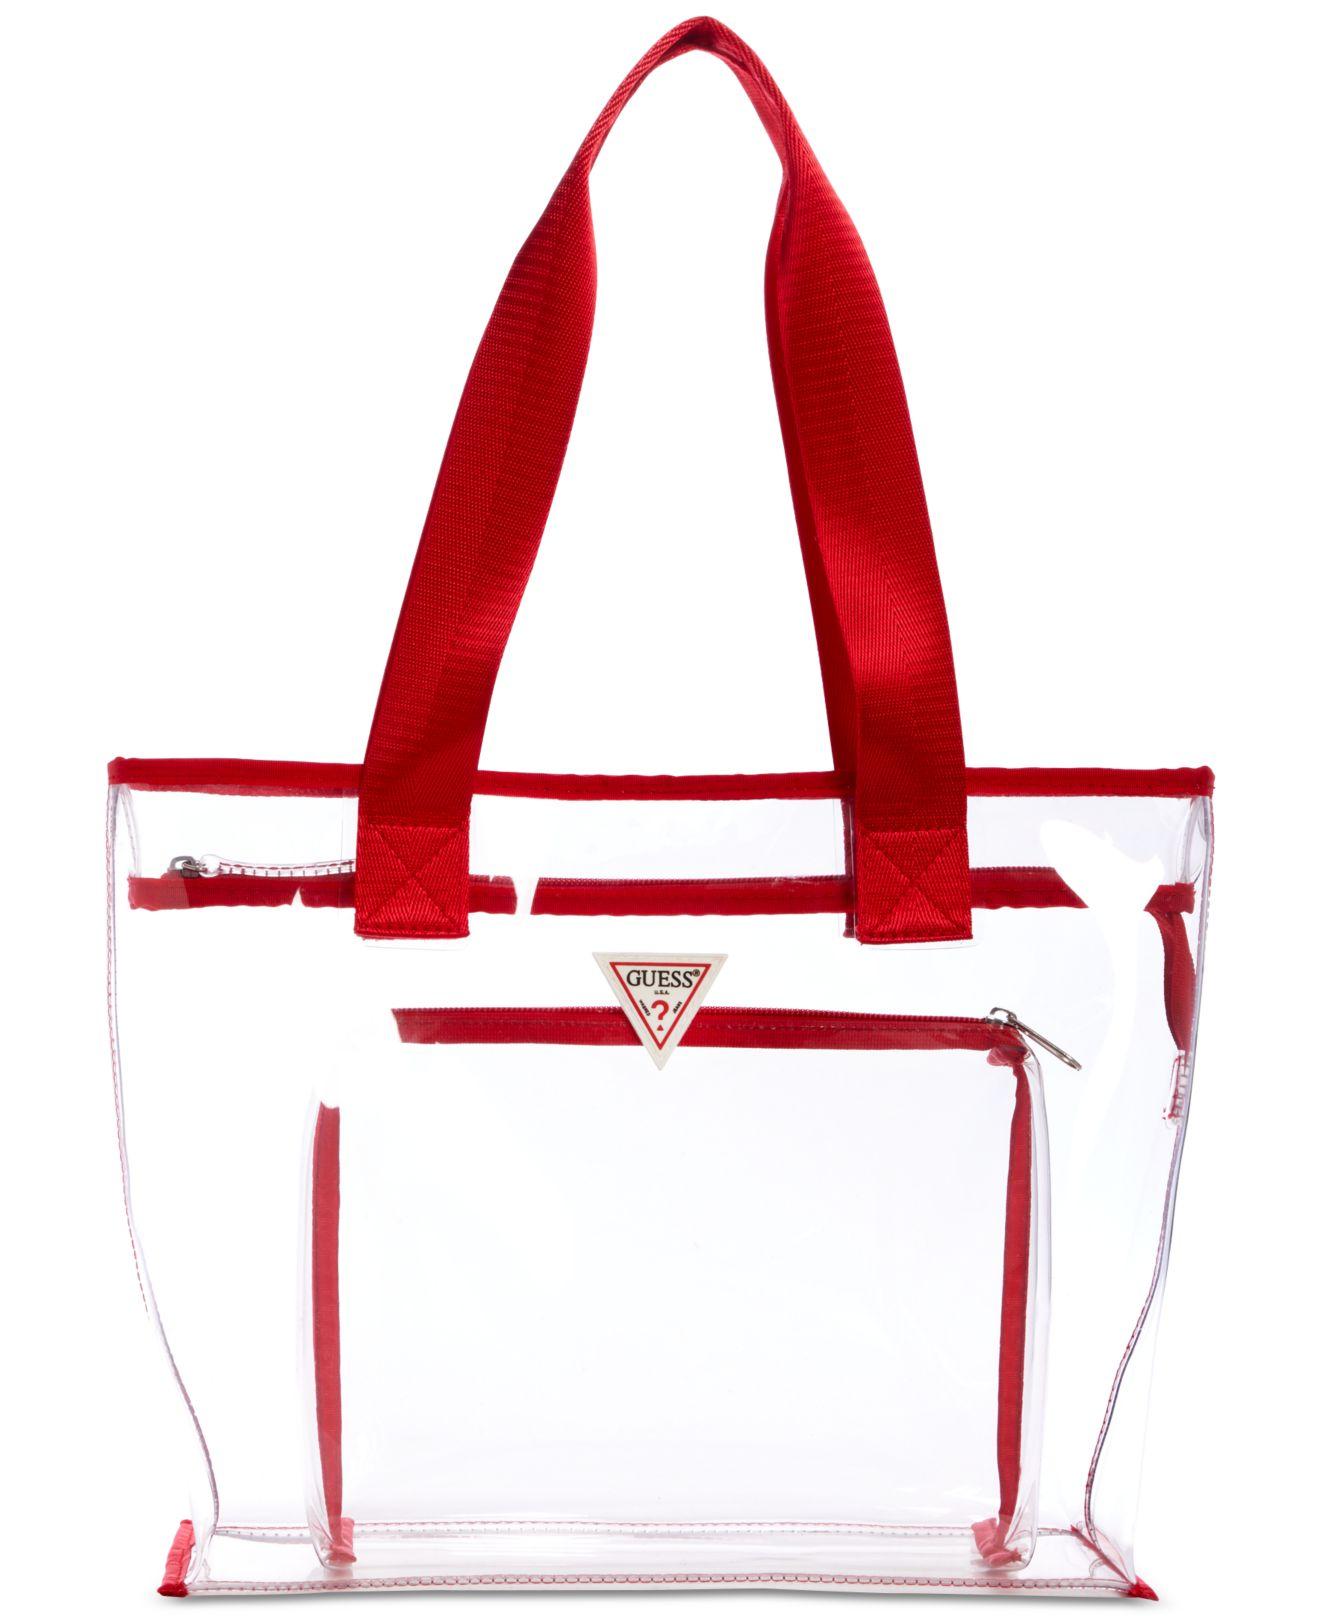 Guess, Bags, Guess Red Tote Bag